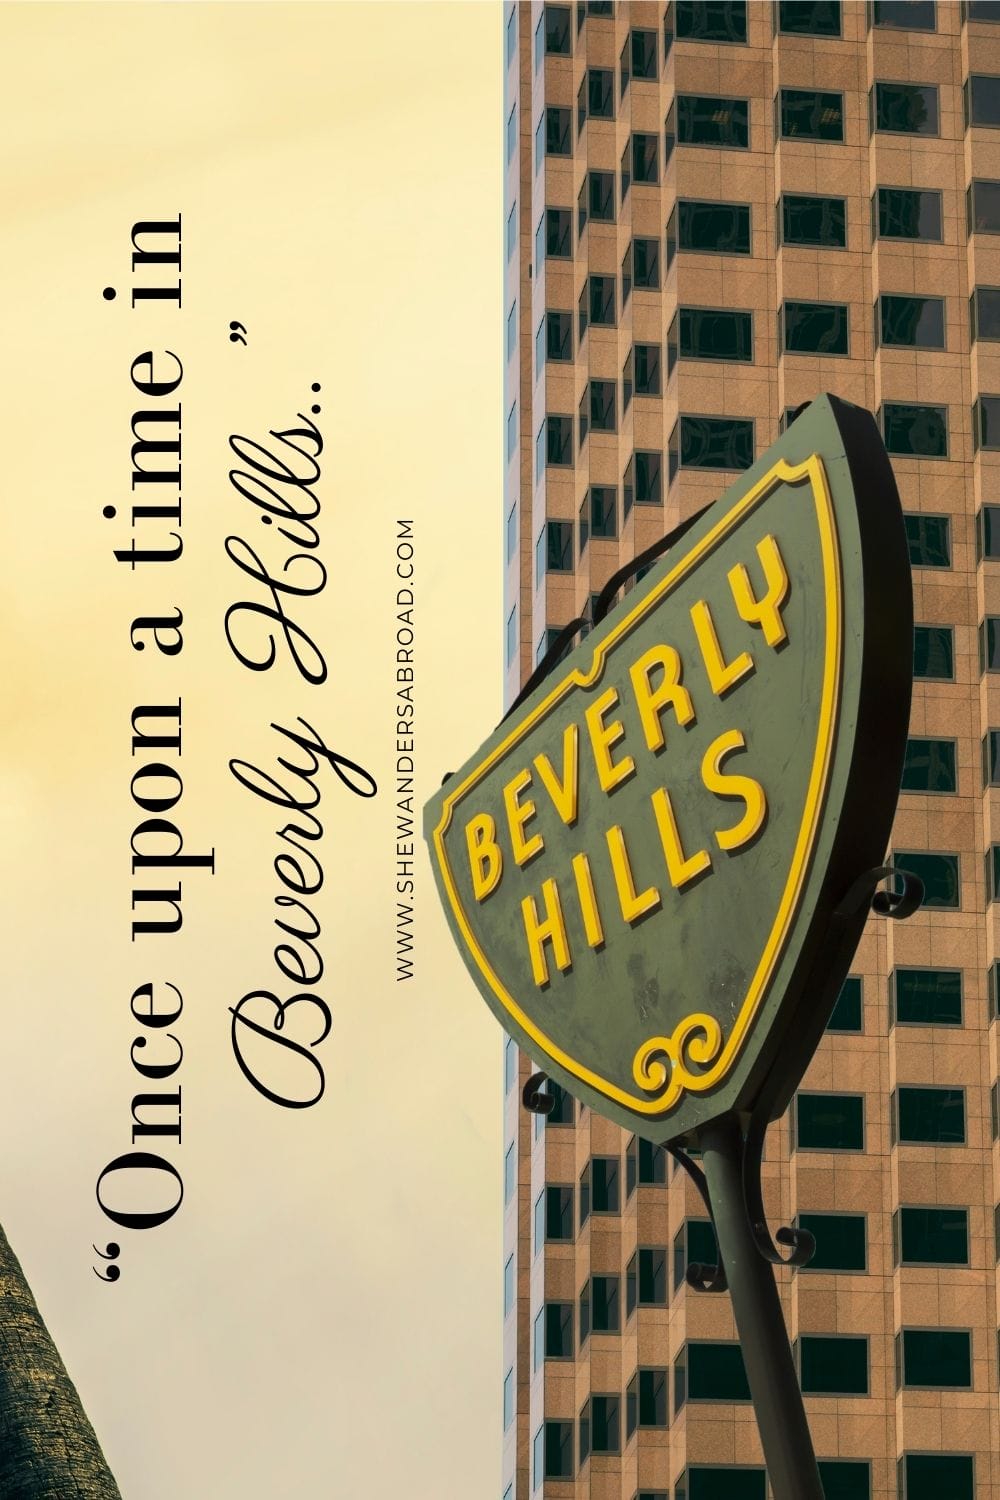 Beverly Hills Captions